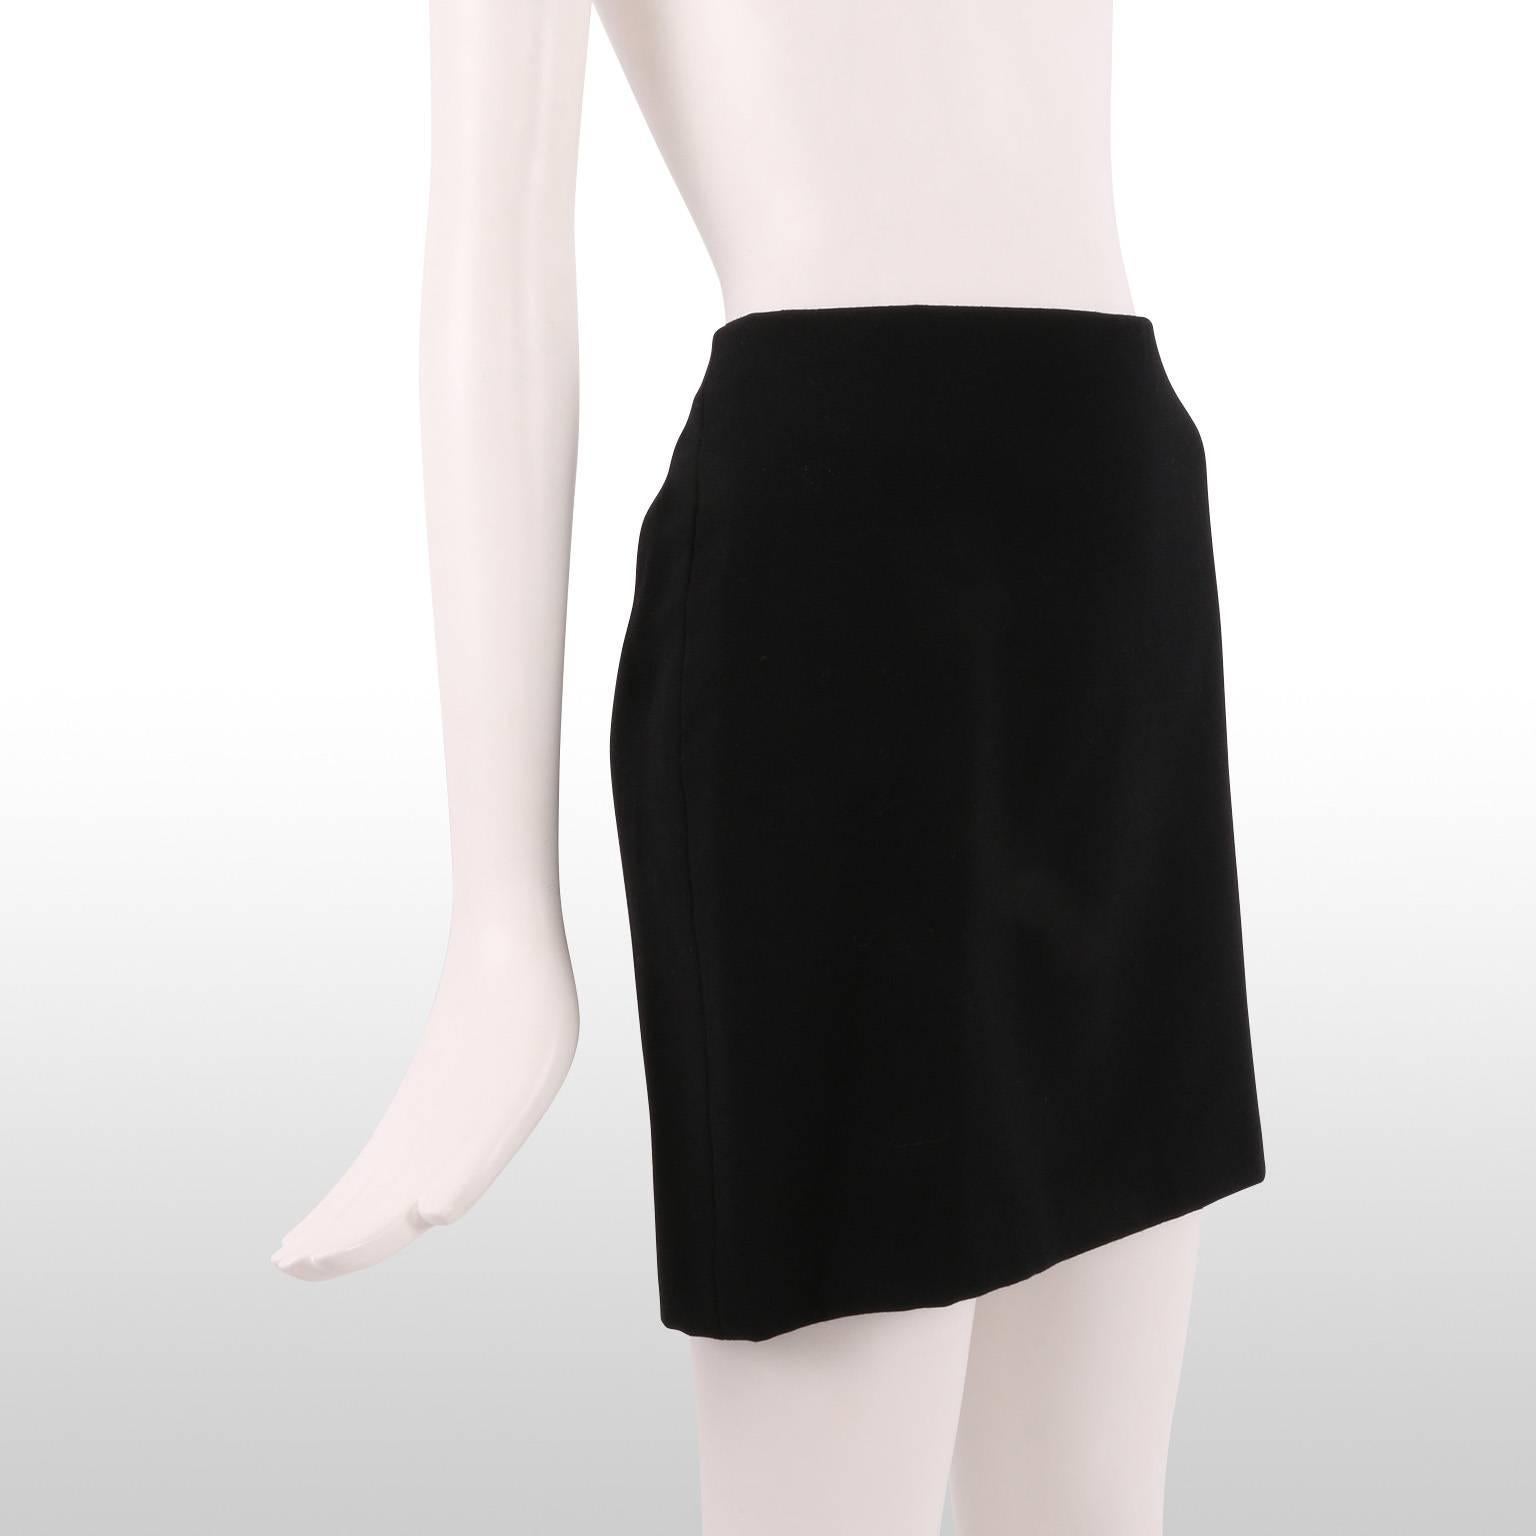 Classic Dolce and Gabbana black mini skirt with a leopard print lining gives the skirt a unique pop. A wardrobe essential, this piece is great for everyday and work wear and can be styled with a classic white shirt. The skirt is in excellent